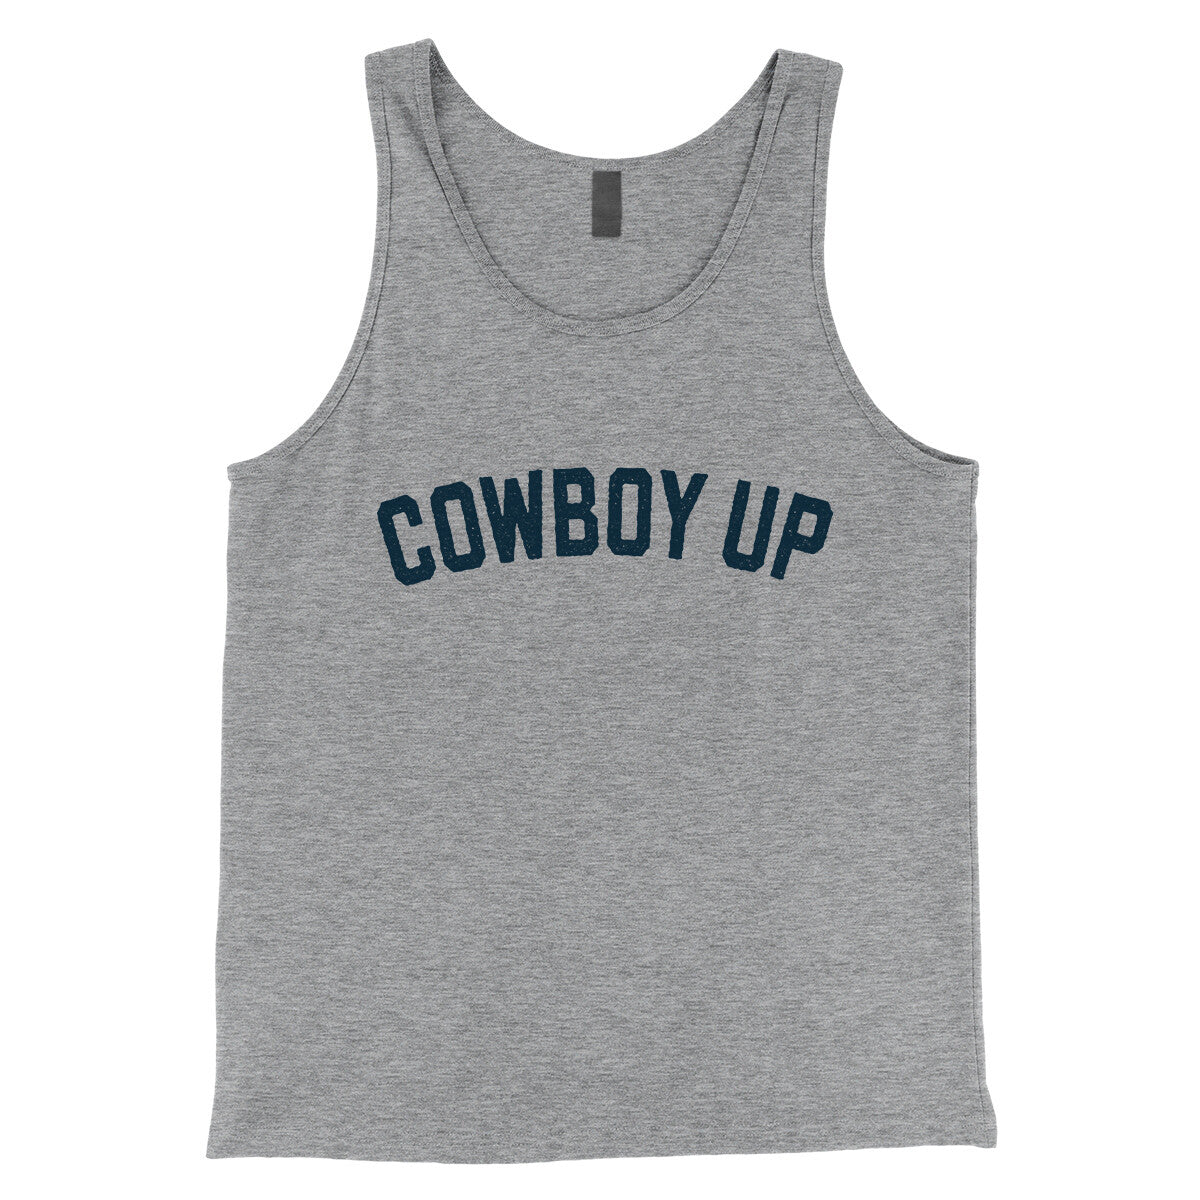 Cowboy Up in Athletic Heather Color